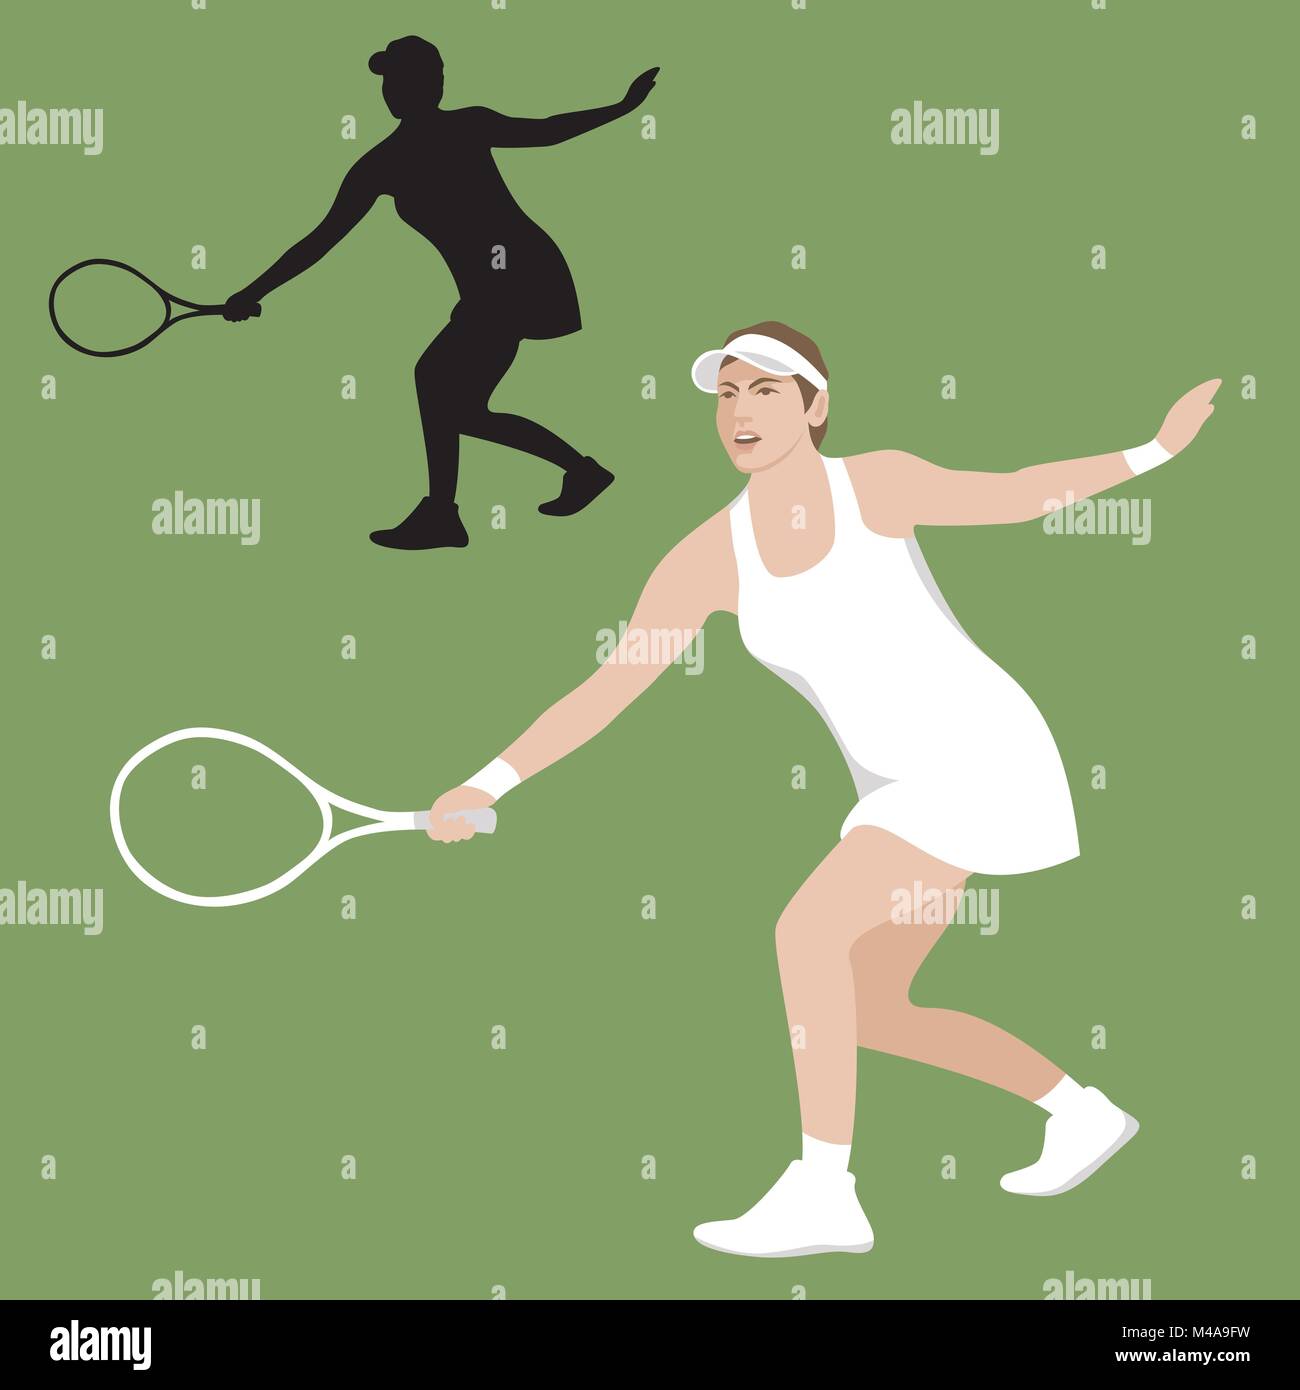 tennis player vector illustration flat style  front side Stock Vector